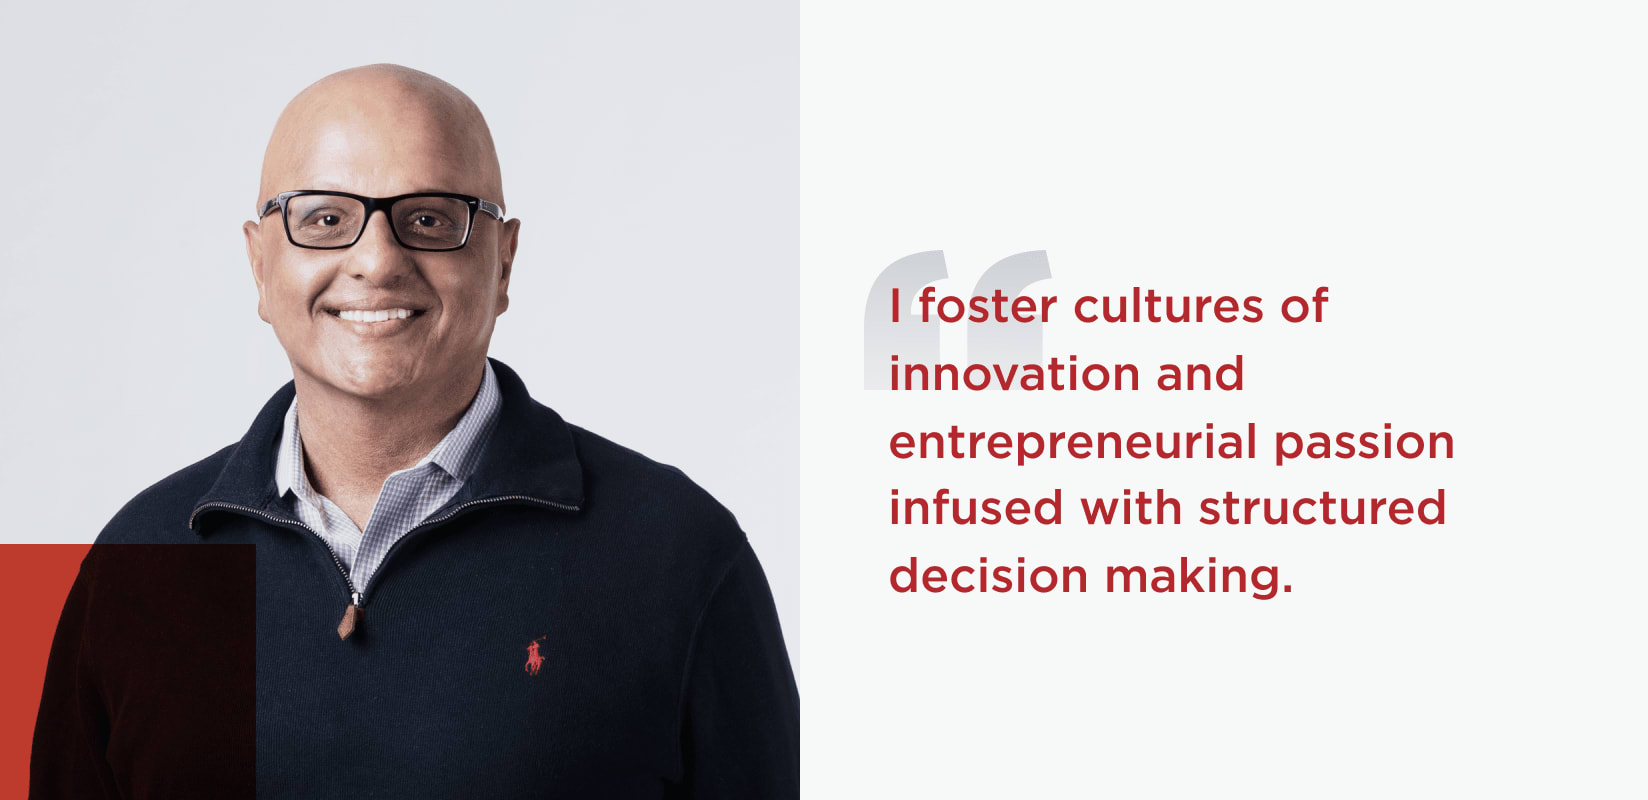 Quote from Raj Dani, Chief Financial Officer. I foster cultures of innovation and entrepreneurial passion infused with structured decision-making